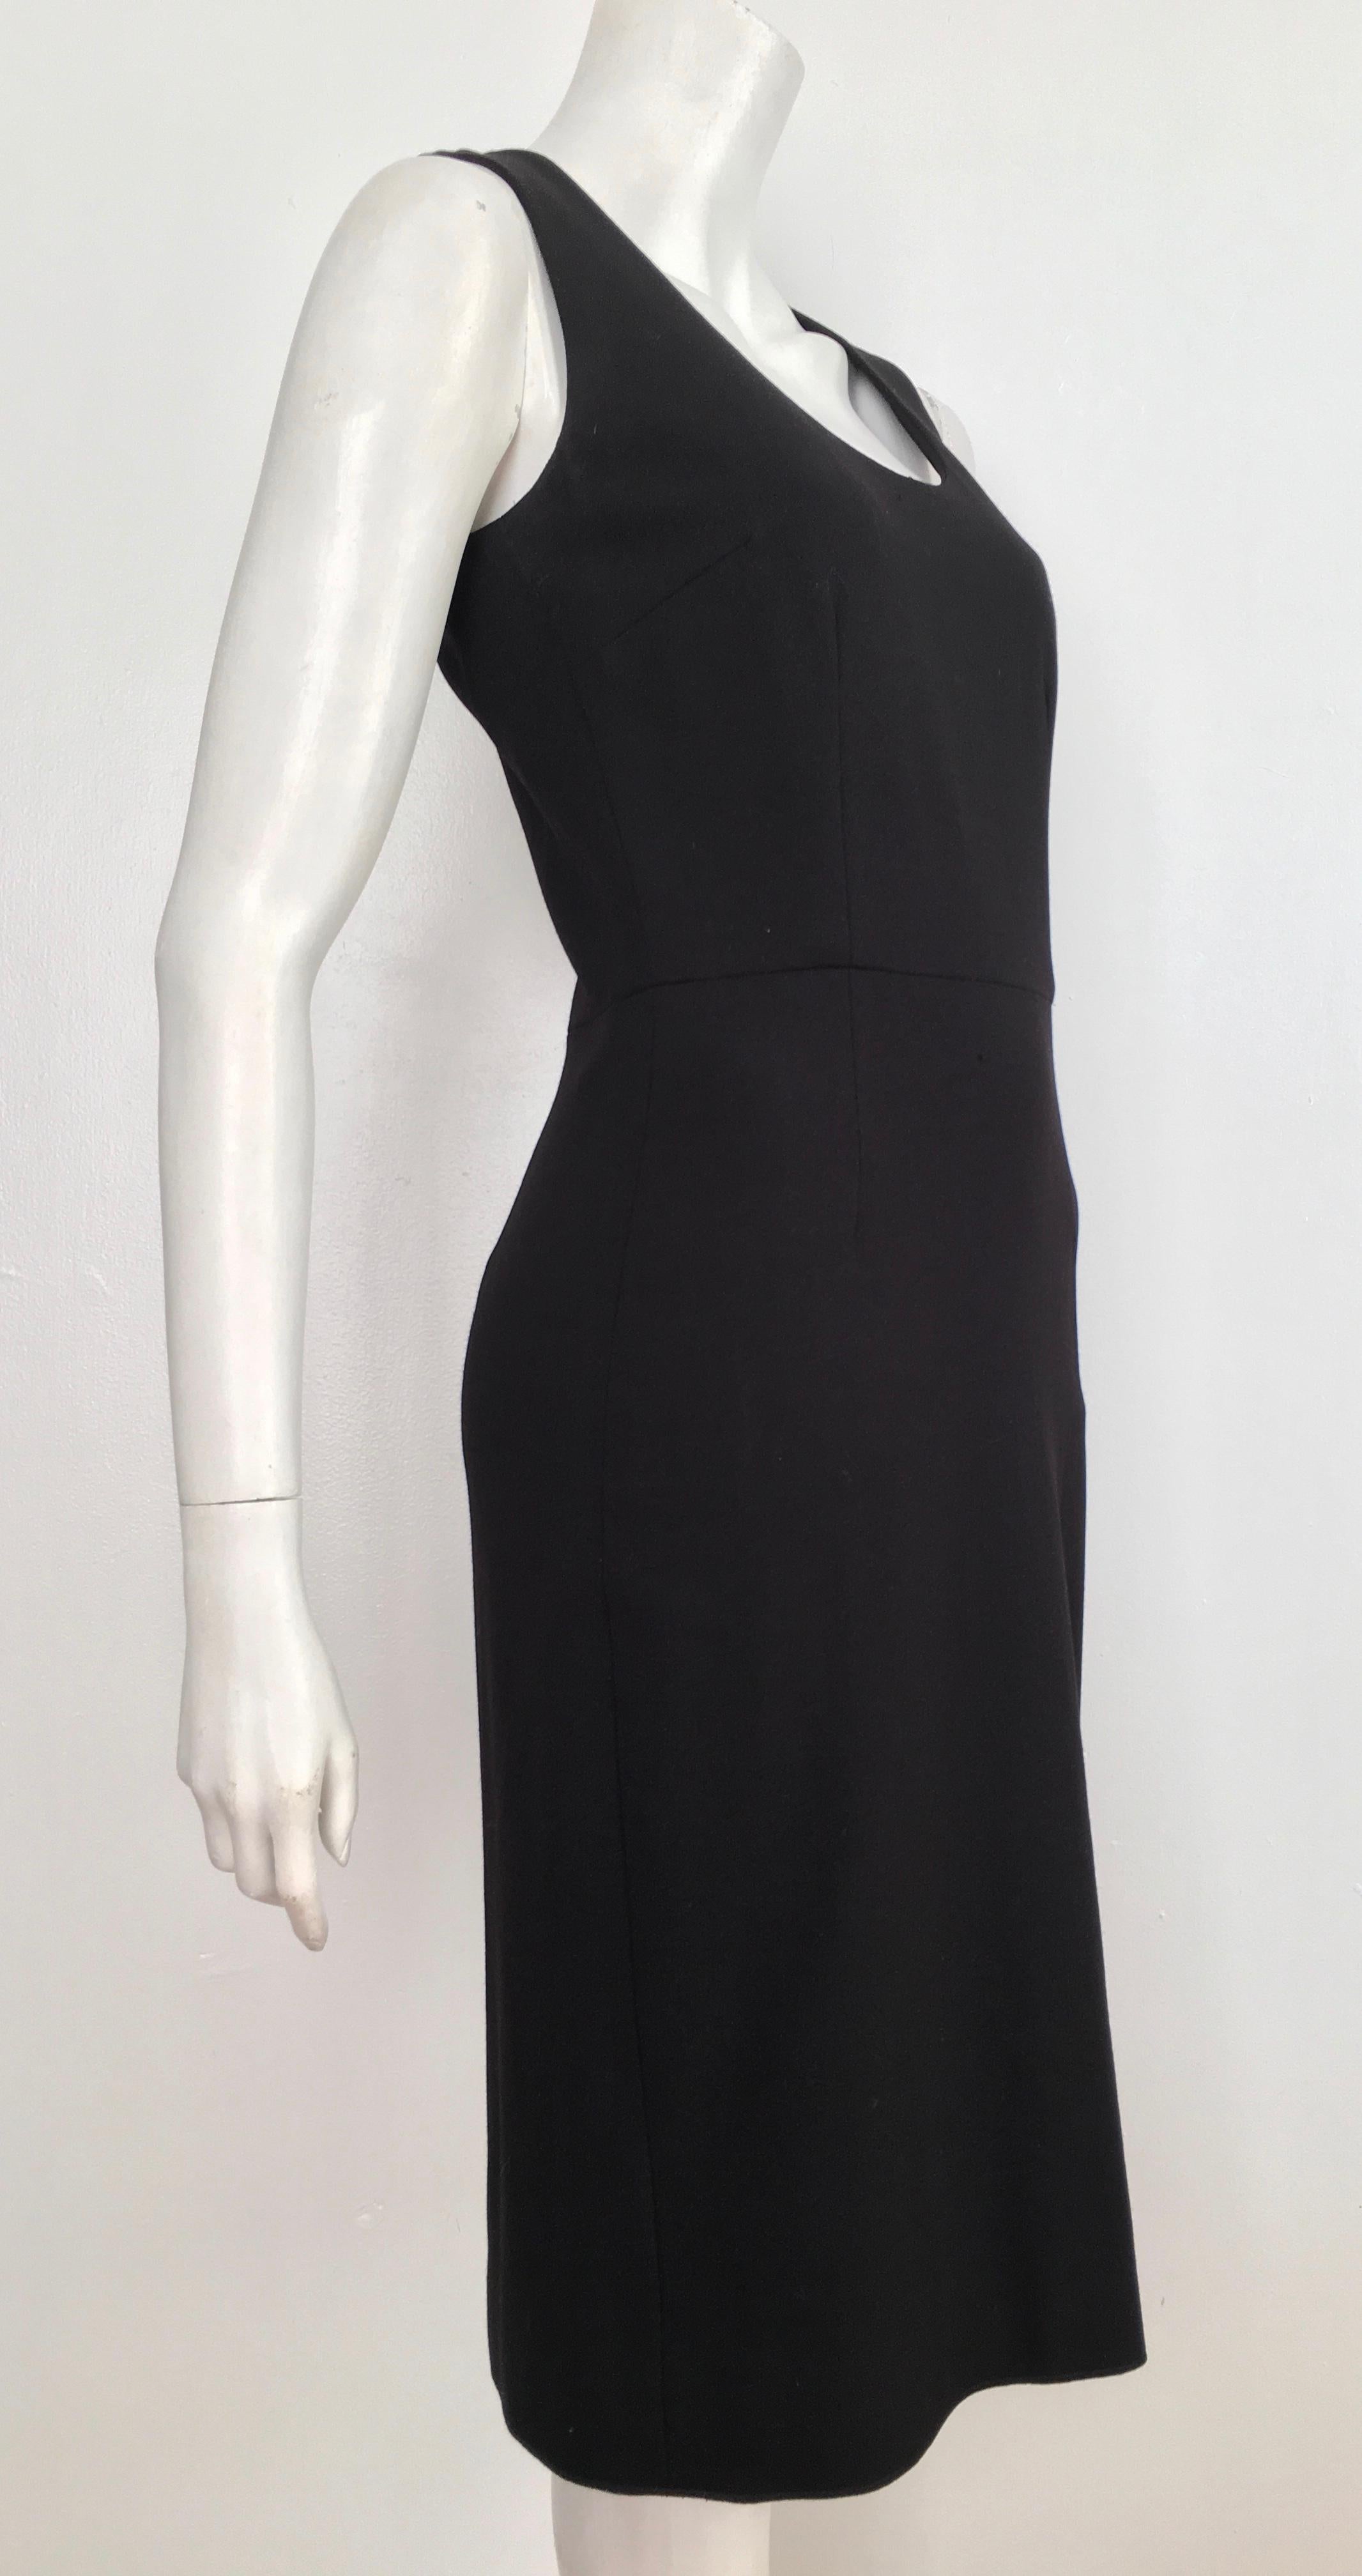 Dolce & Gabbana 1990s Black Wool Sheath Dress Size 4. In Excellent Condition For Sale In Atlanta, GA